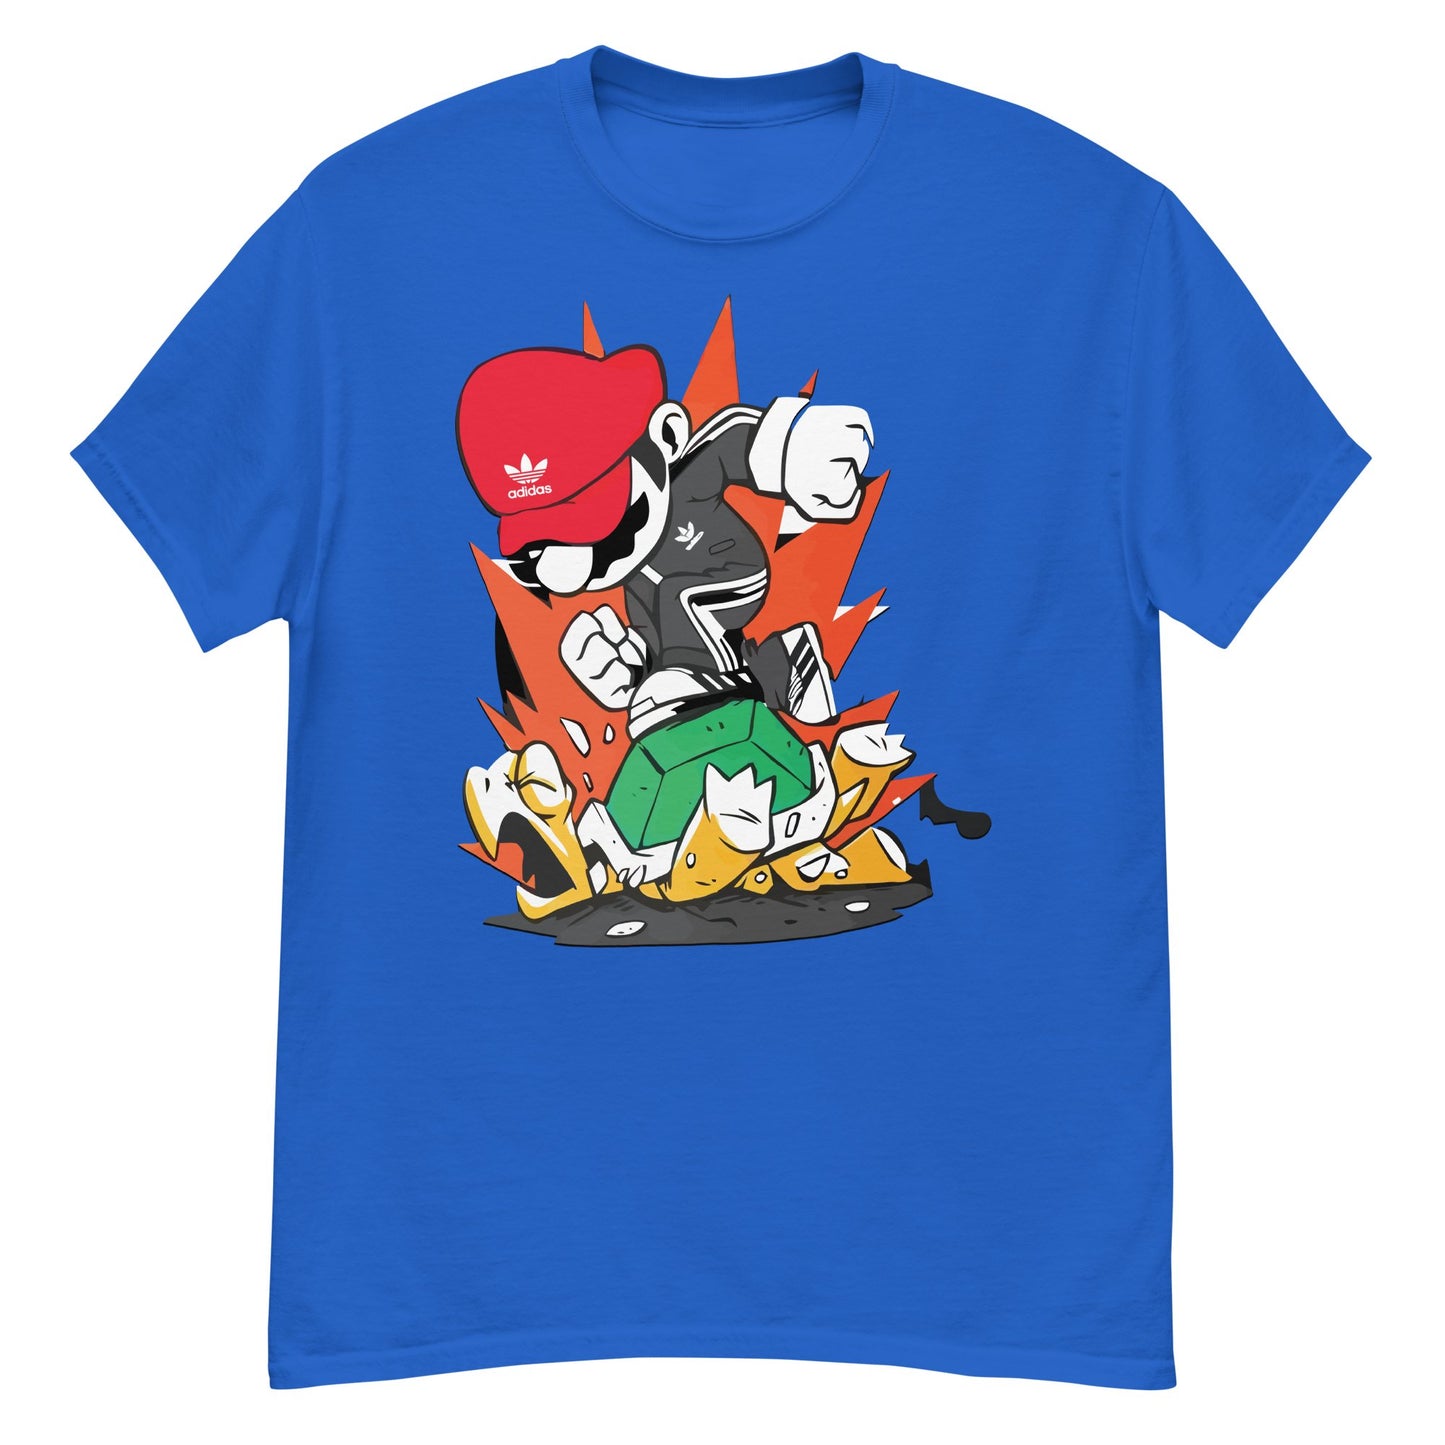 Super Mario Jumping on a Turtle T-shirt; Embrace the classic adventure - The Truth Graphics